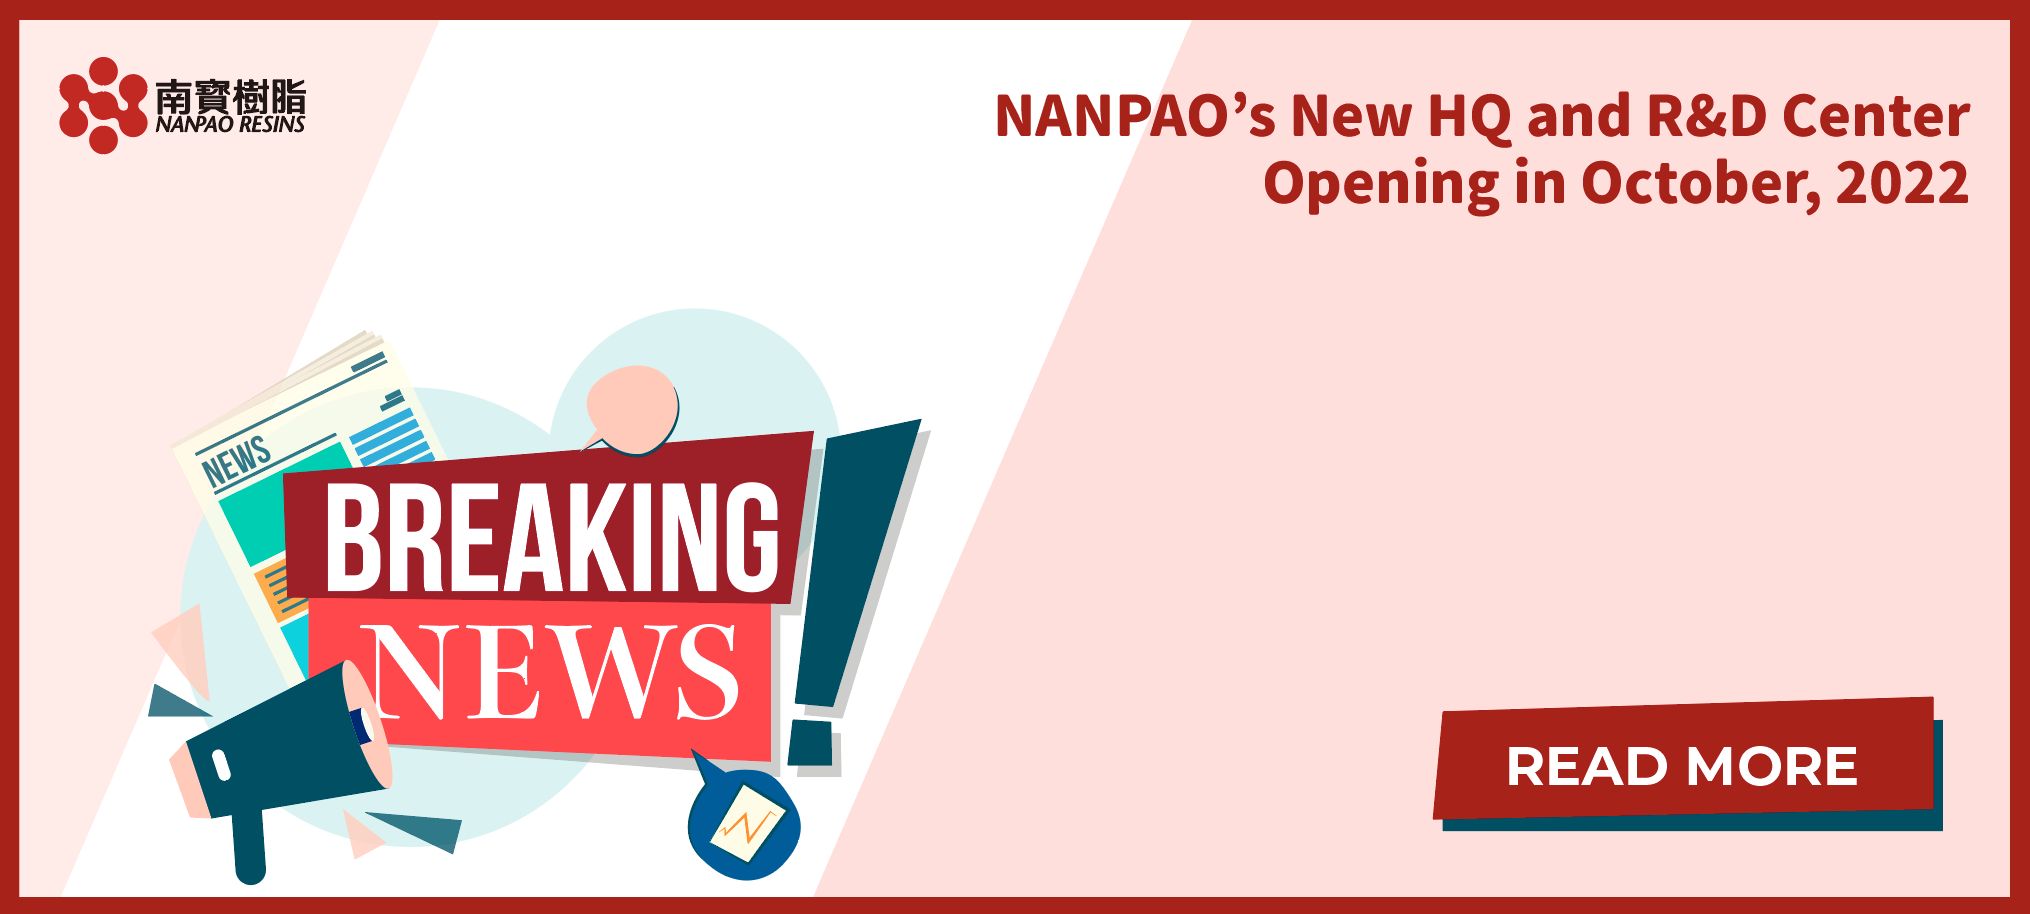 NANPAO’s New HQ and R&D Center Opening in October, 2022